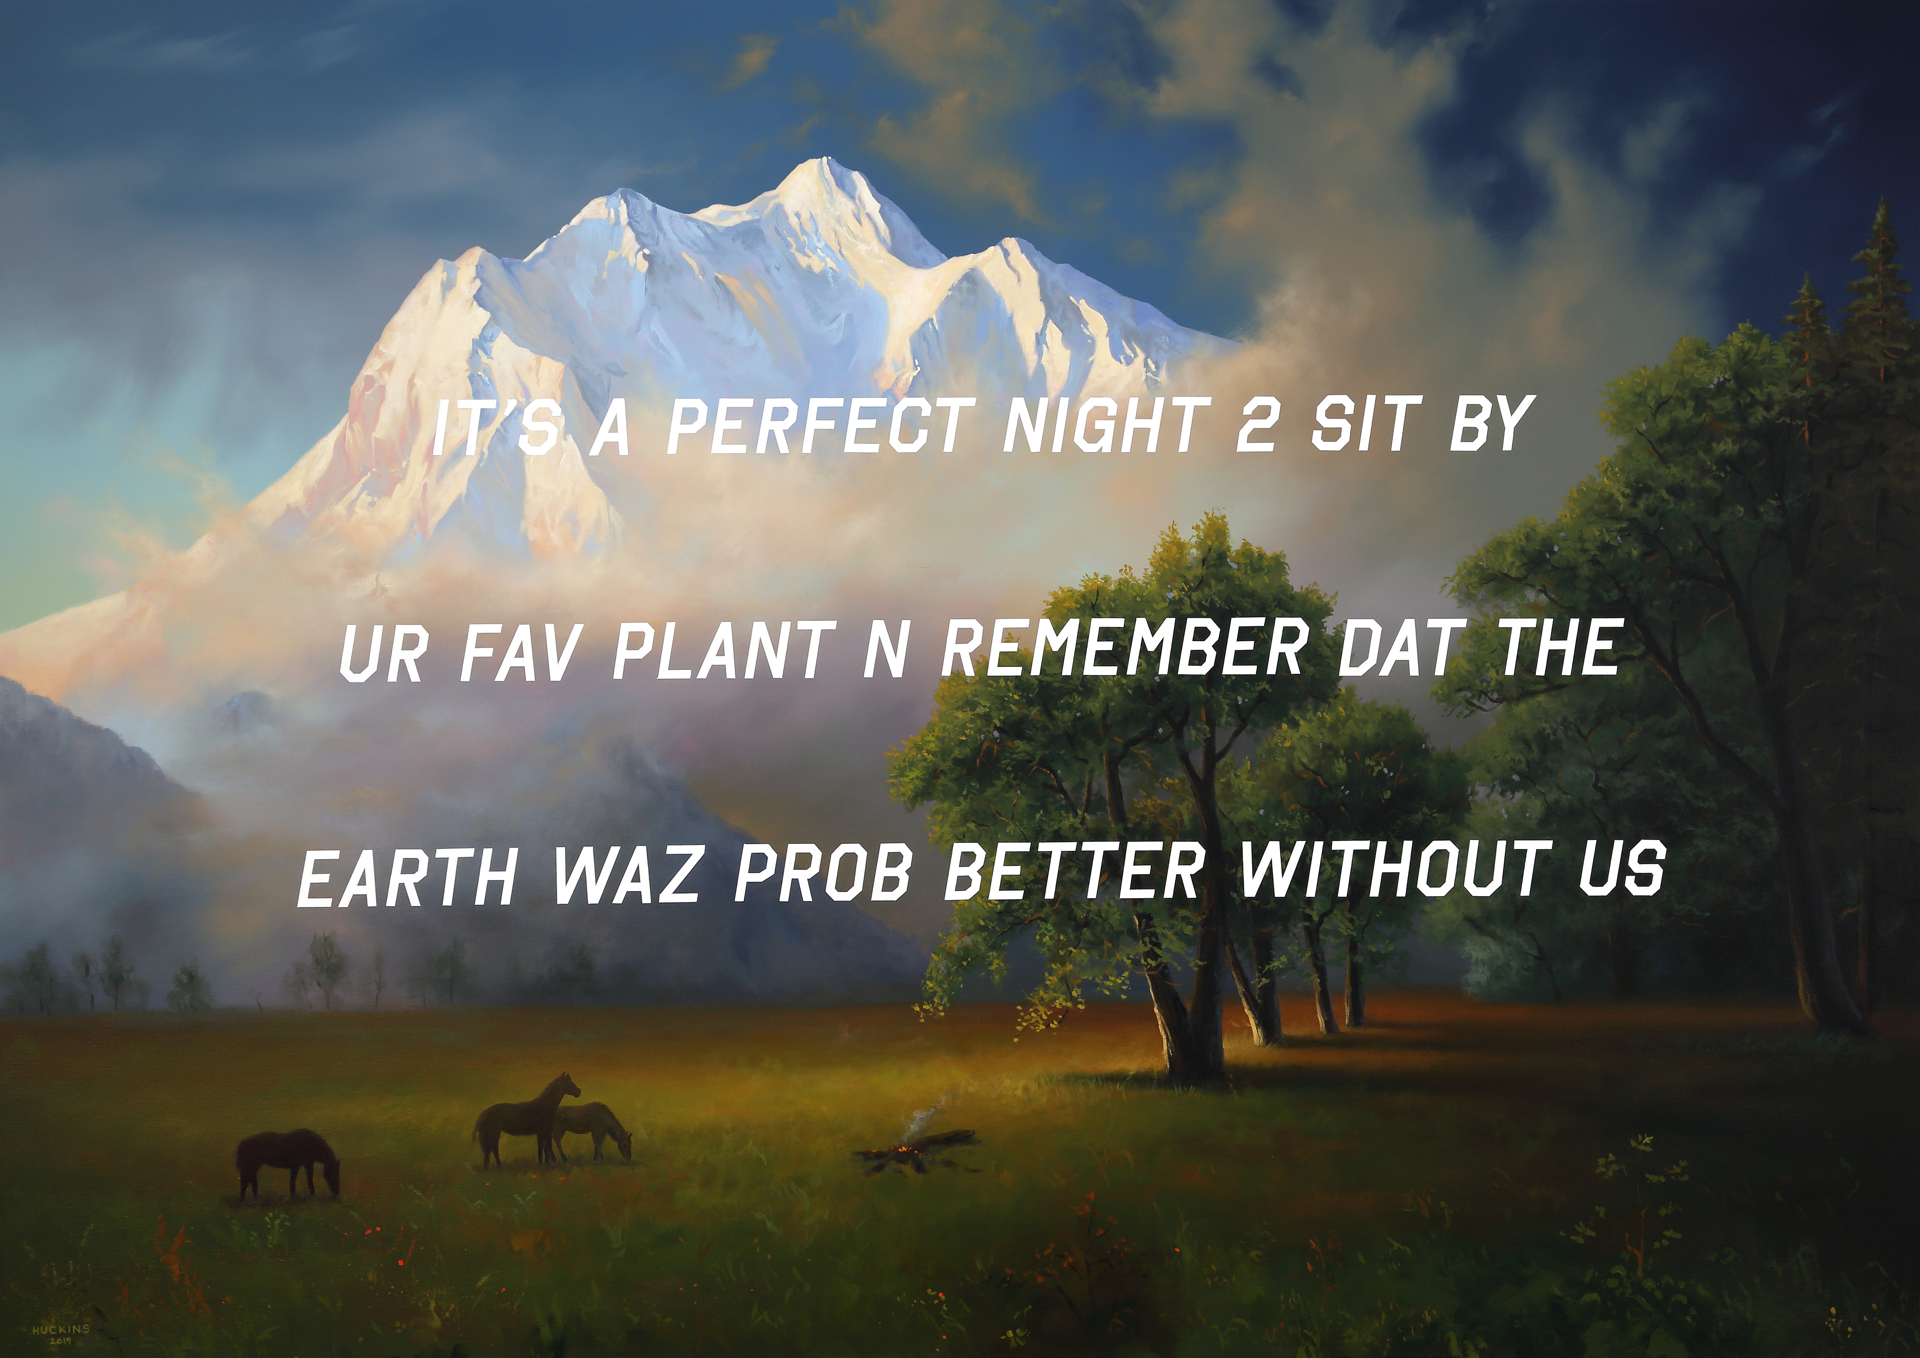 A Mountain Landscape: It's a Perfect Night to Sit By Your Favorite Plant and Remember that the Earth was probably better without Us by Shawn Huckins